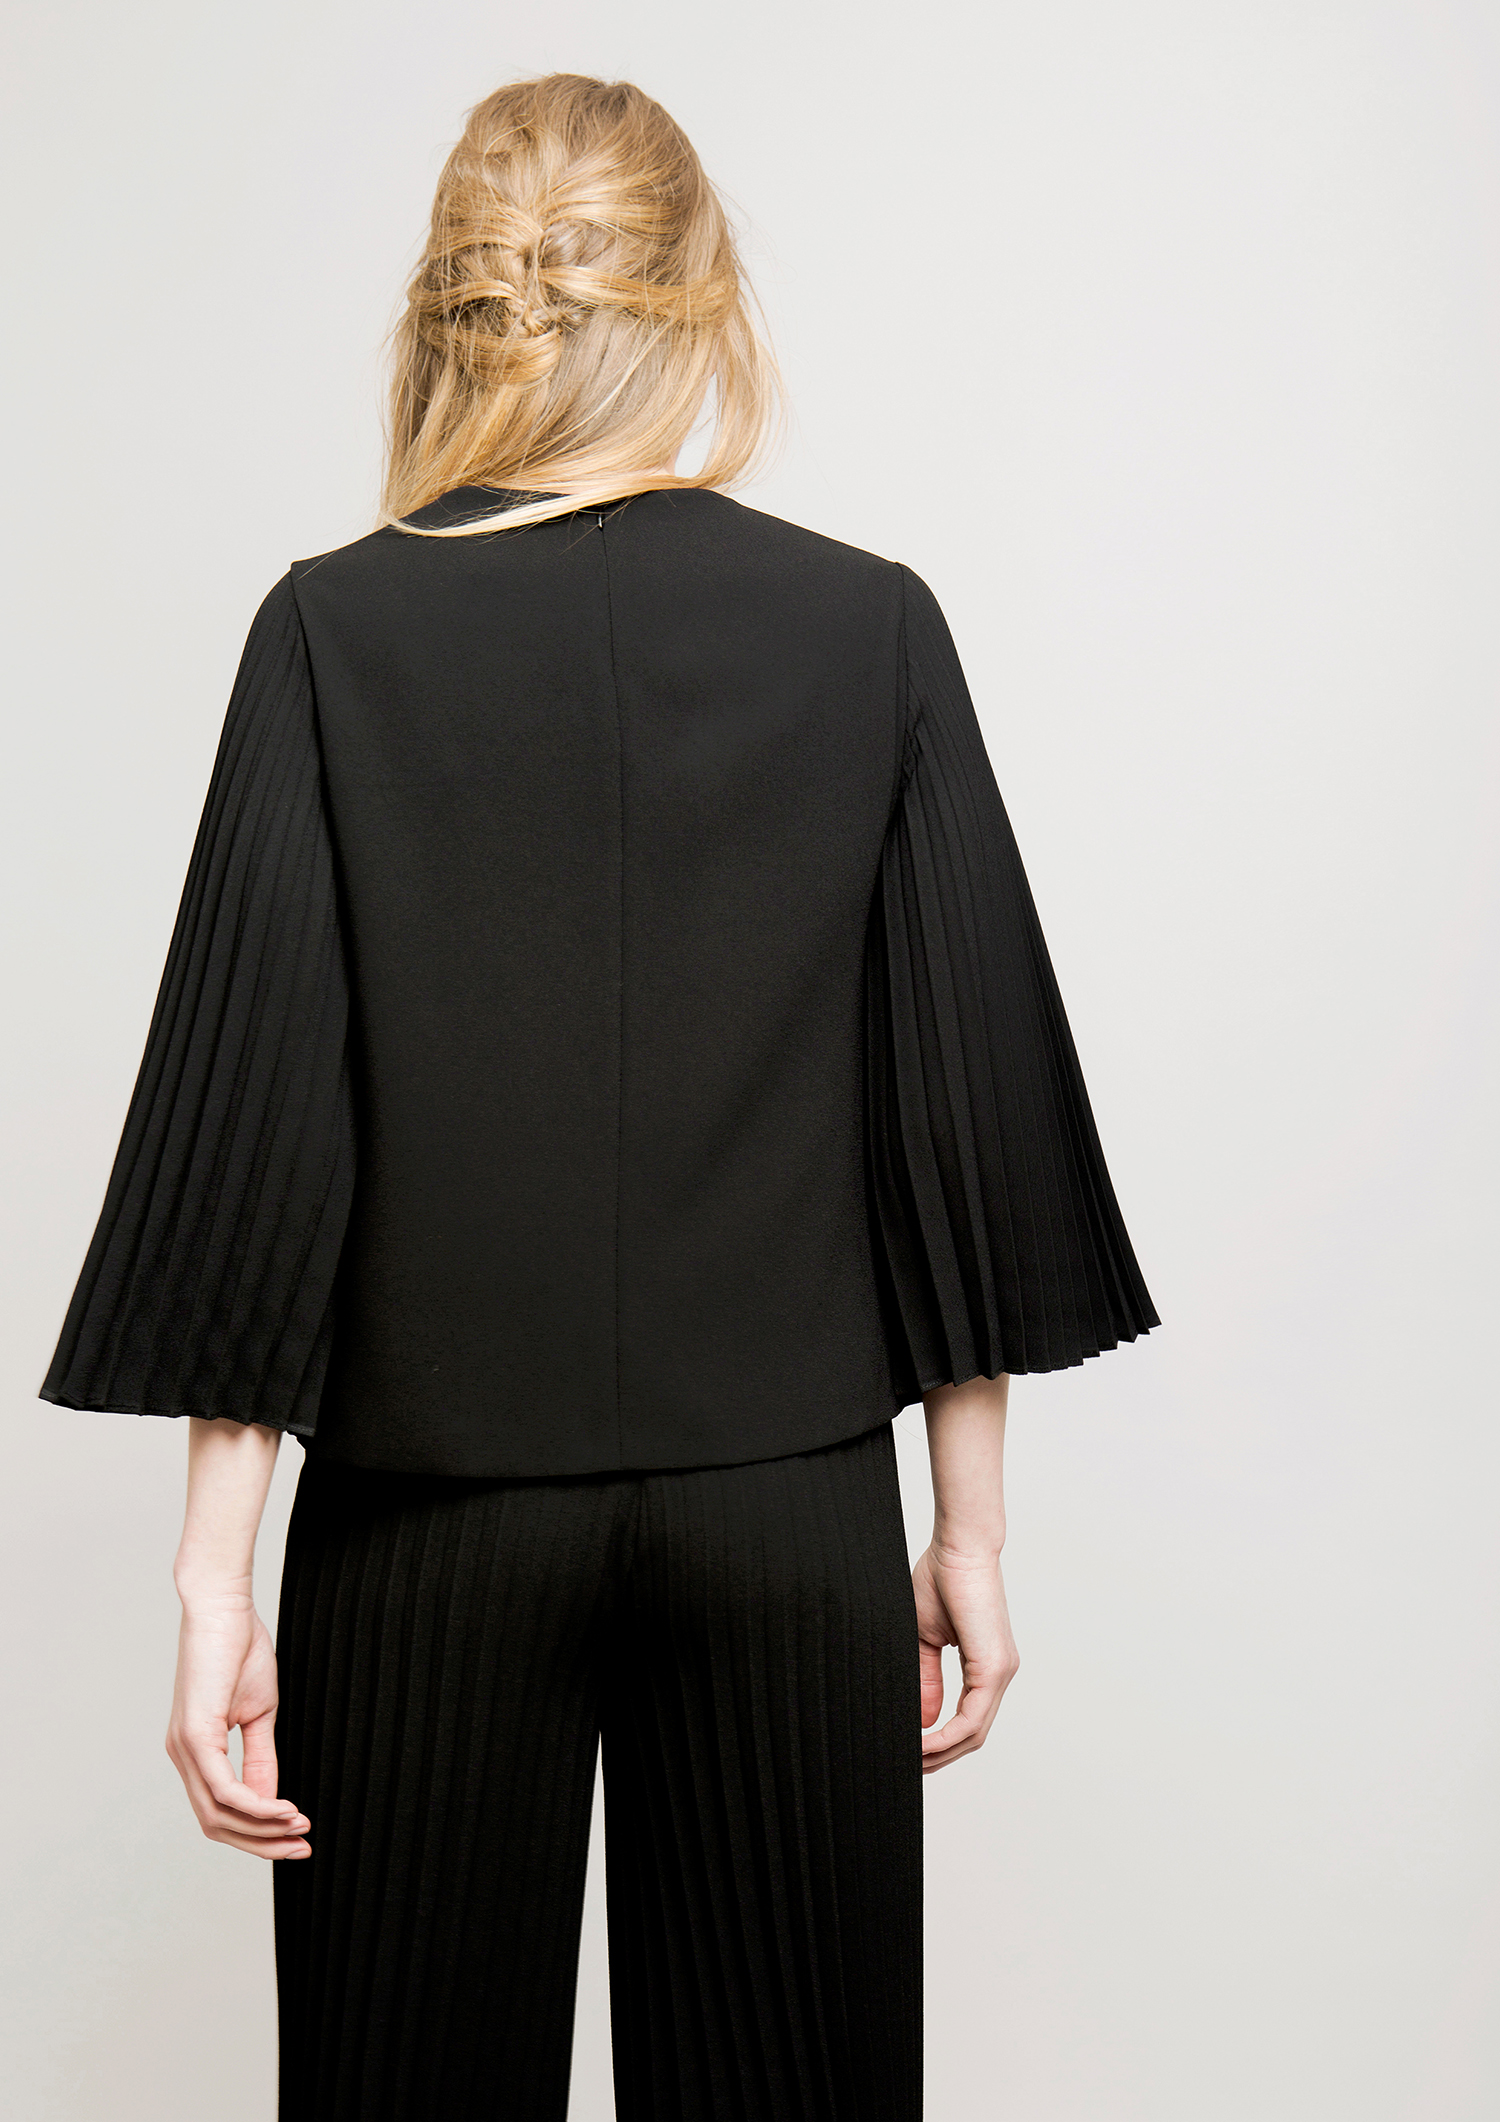 Black top with pleated sleeves.